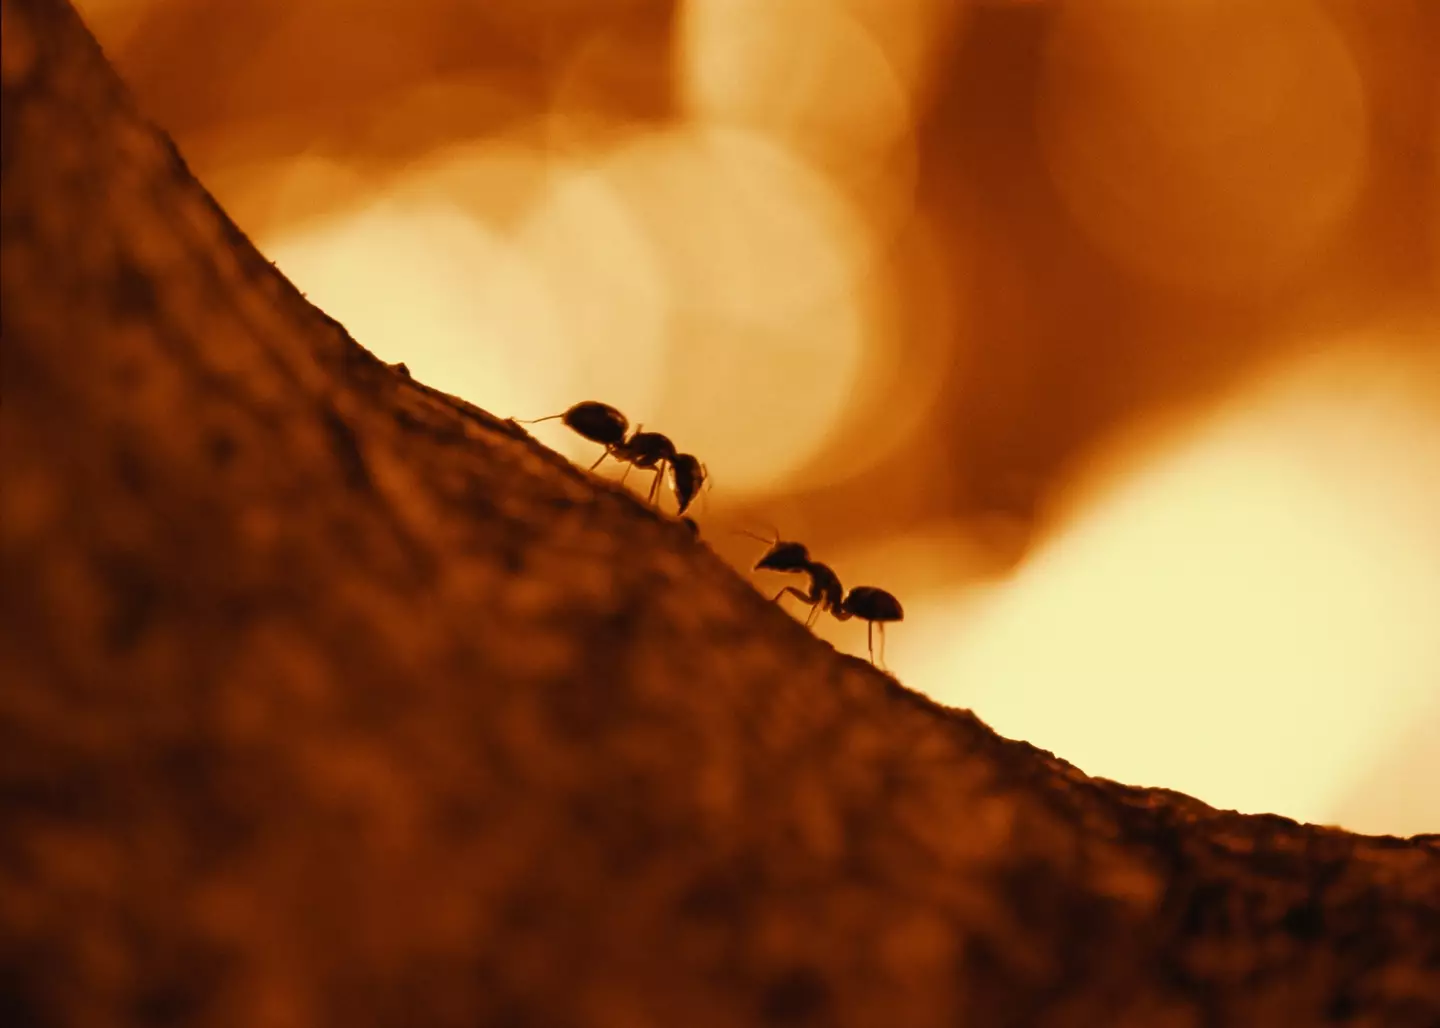 The ants had to move 40 tonnes of dirt to build the city, each trip was the equivalent of a human carrying four times their weight for a kilometre.